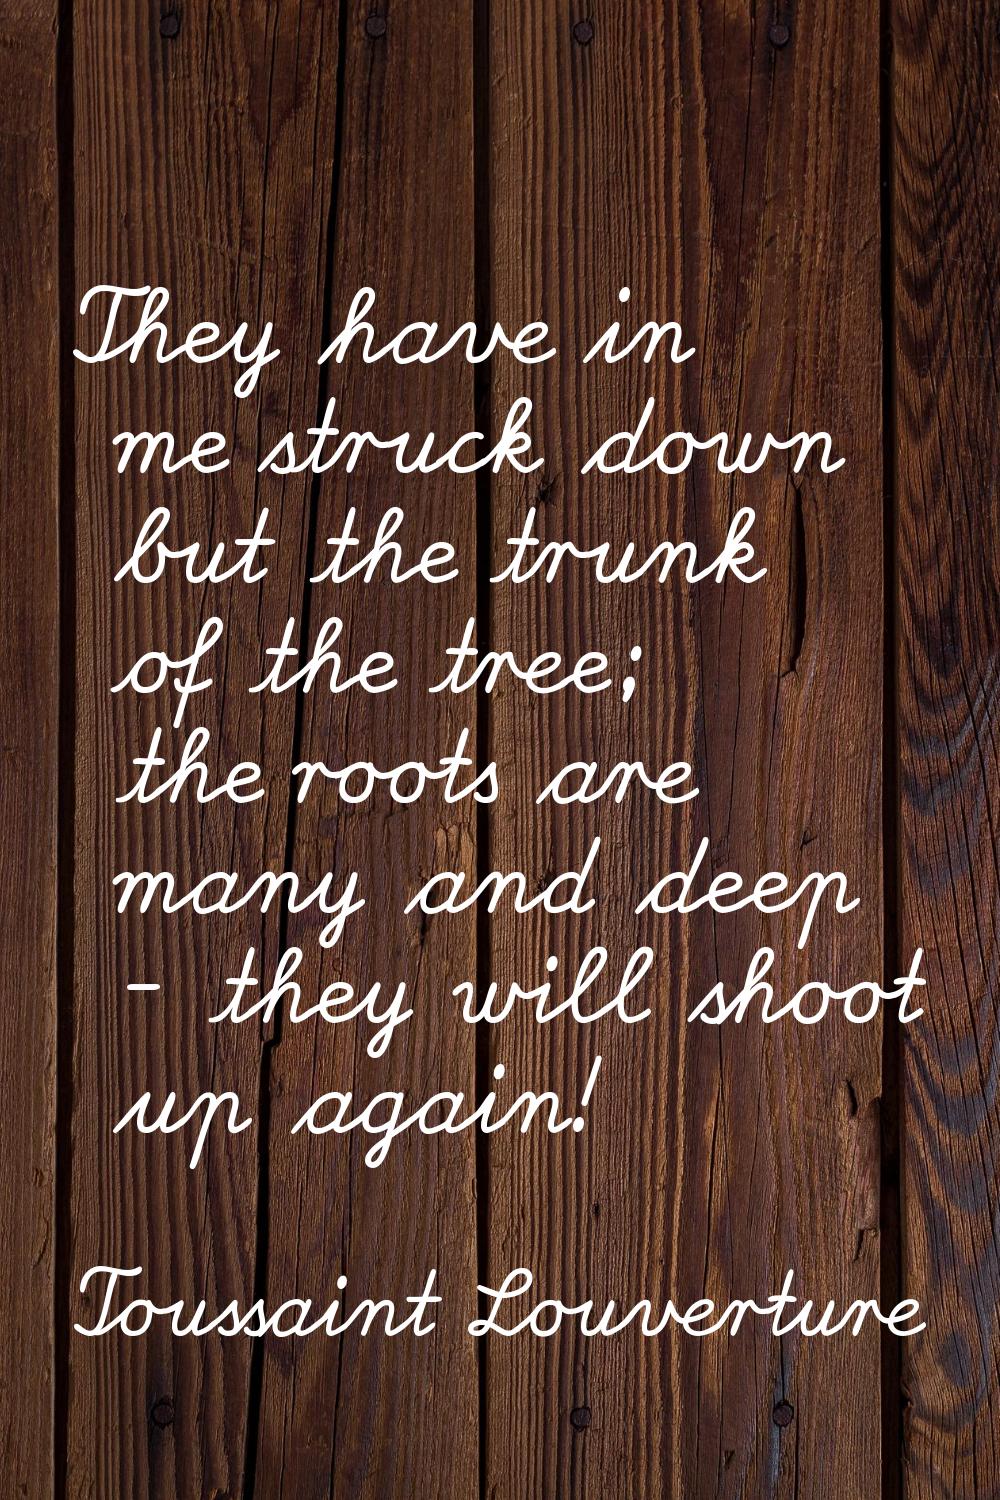 They have in me struck down but the trunk of the tree; the roots are many and deep - they will shoo